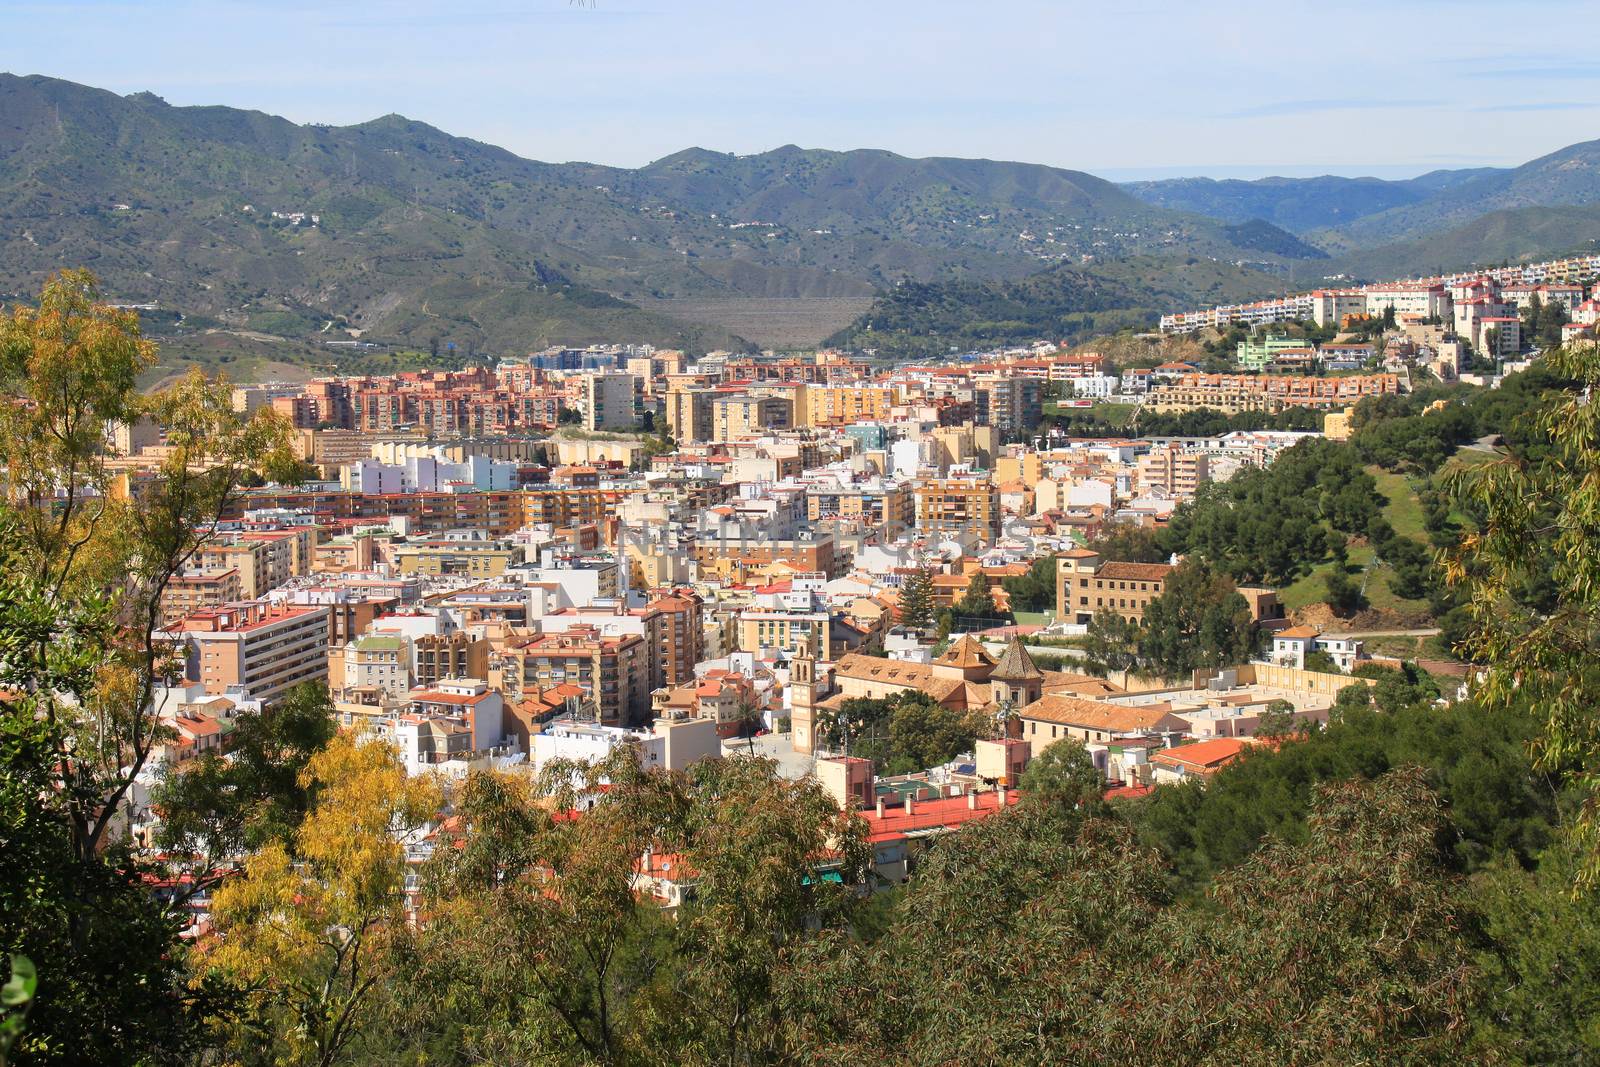 View of Malaga Spain, with mountains in the back and trees in front